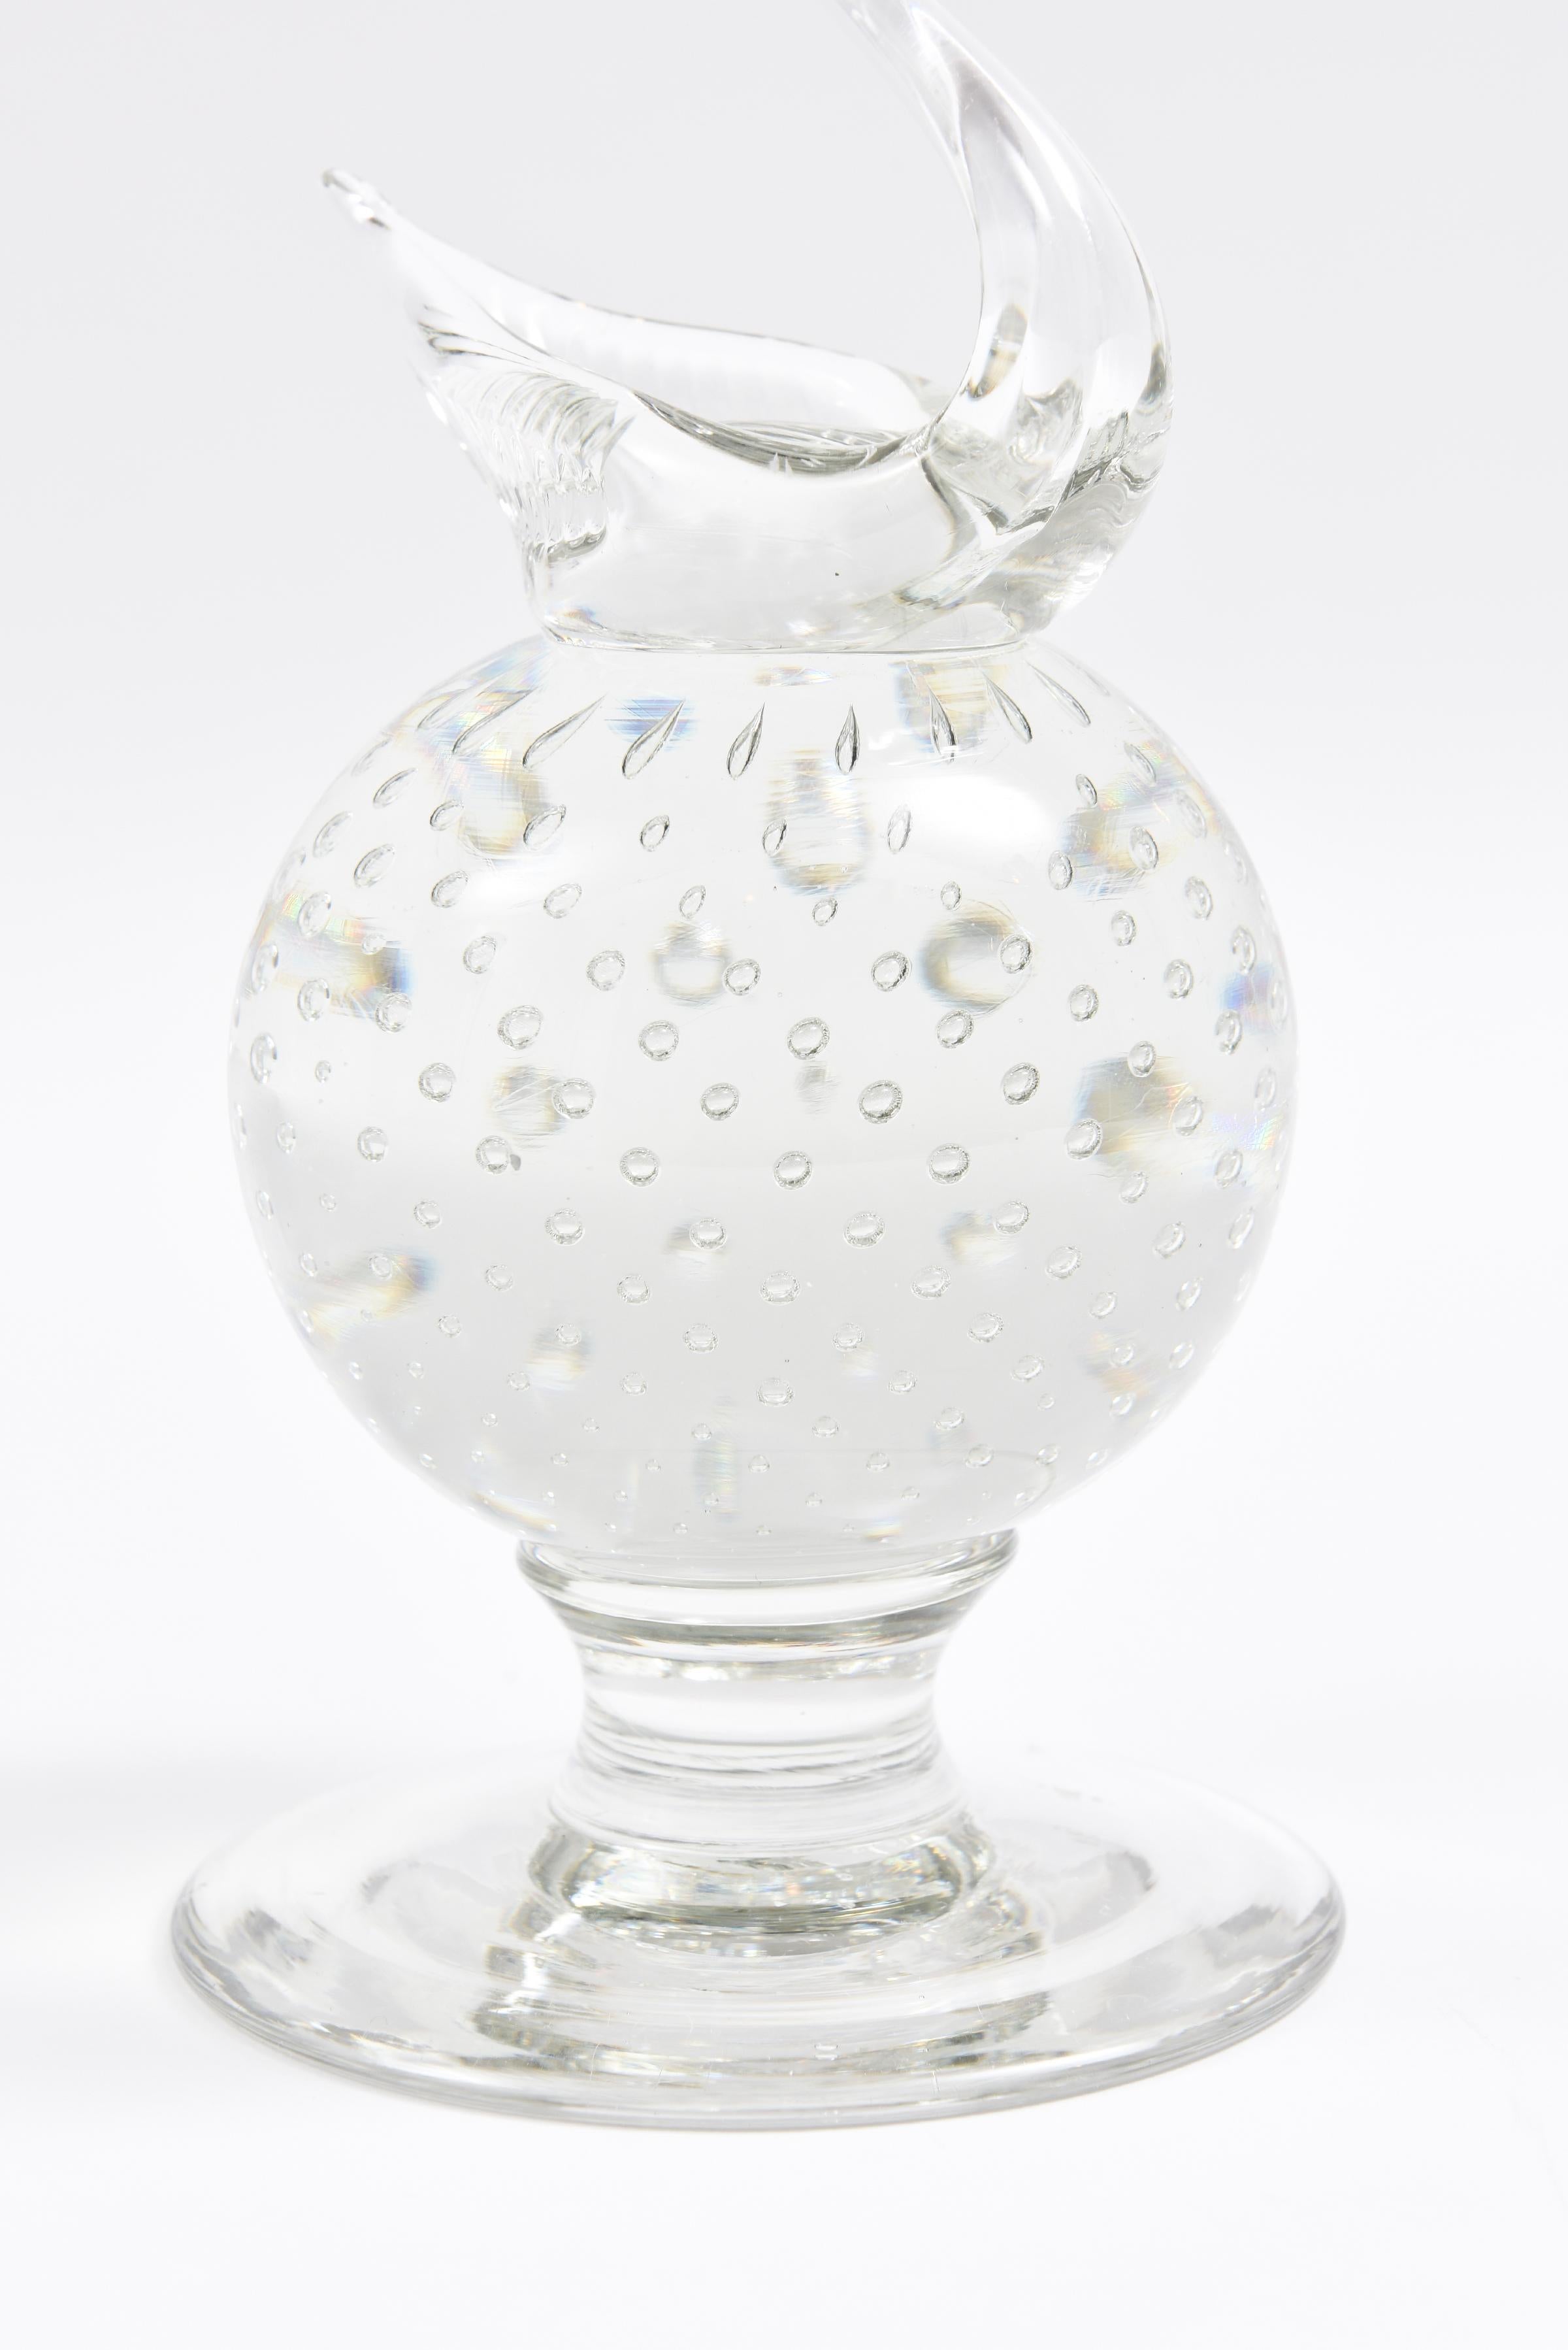 American Pairpoint Blown Glass Paperweight, Figural Swan Motif, Vintage, circa 1950s For Sale